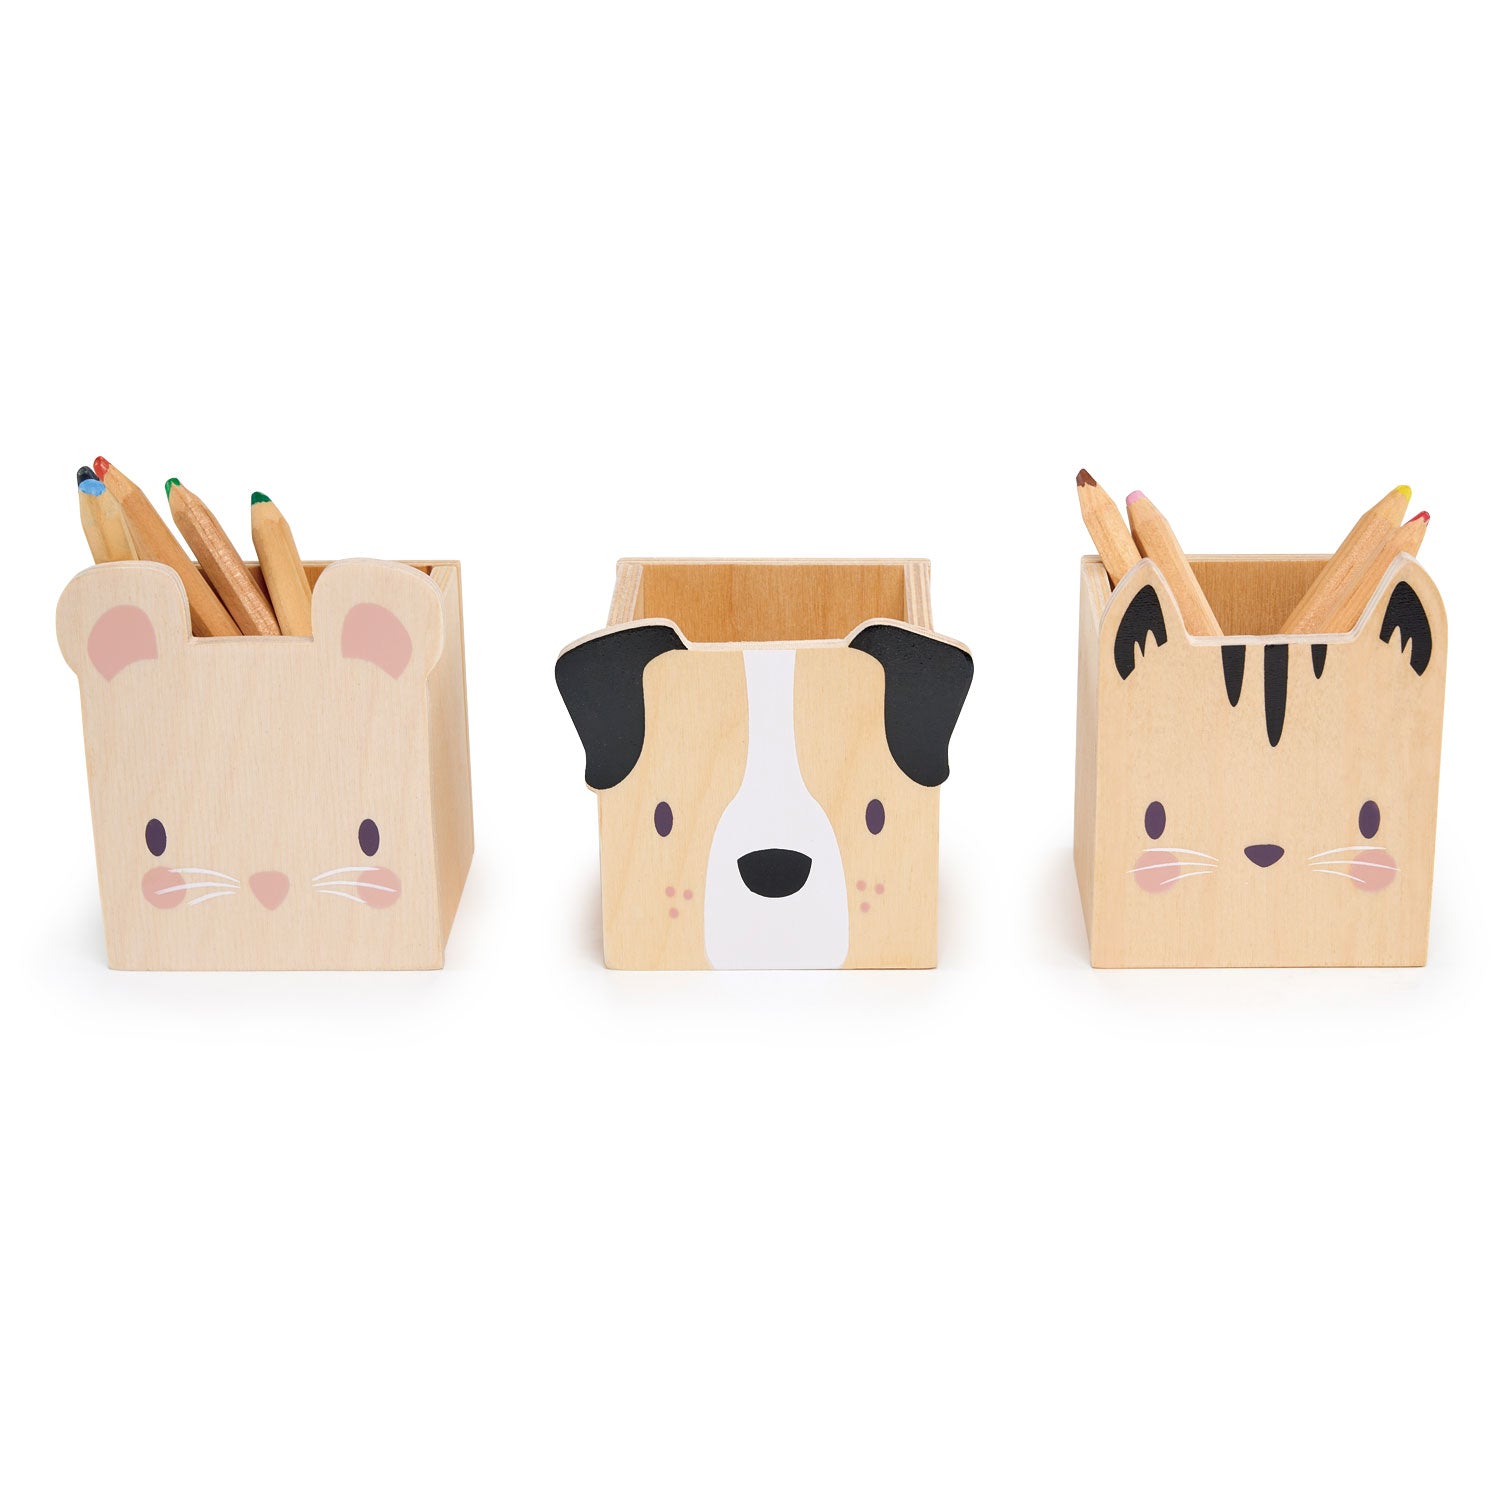 <p>Keep your pencils all in one place with these 3 pet pencil holders. A puppy, kitten and mouse face will look so cute sitting on your desk and will keep things tidy for a while! </p>
<p>Age range: 3 years +  </p>
<p>Puppy Pencil Holder 3.78 x 3.15 x 3.27”  </p>
<p>Kitten Pencil Holder 3.54 x 3.15 x 3.94”  </p>
<p>Mouse Pencil Holder 3.15 x 3.15 x 3.94”  </p>
<p>Weight: 0.79 Ibs</p>
